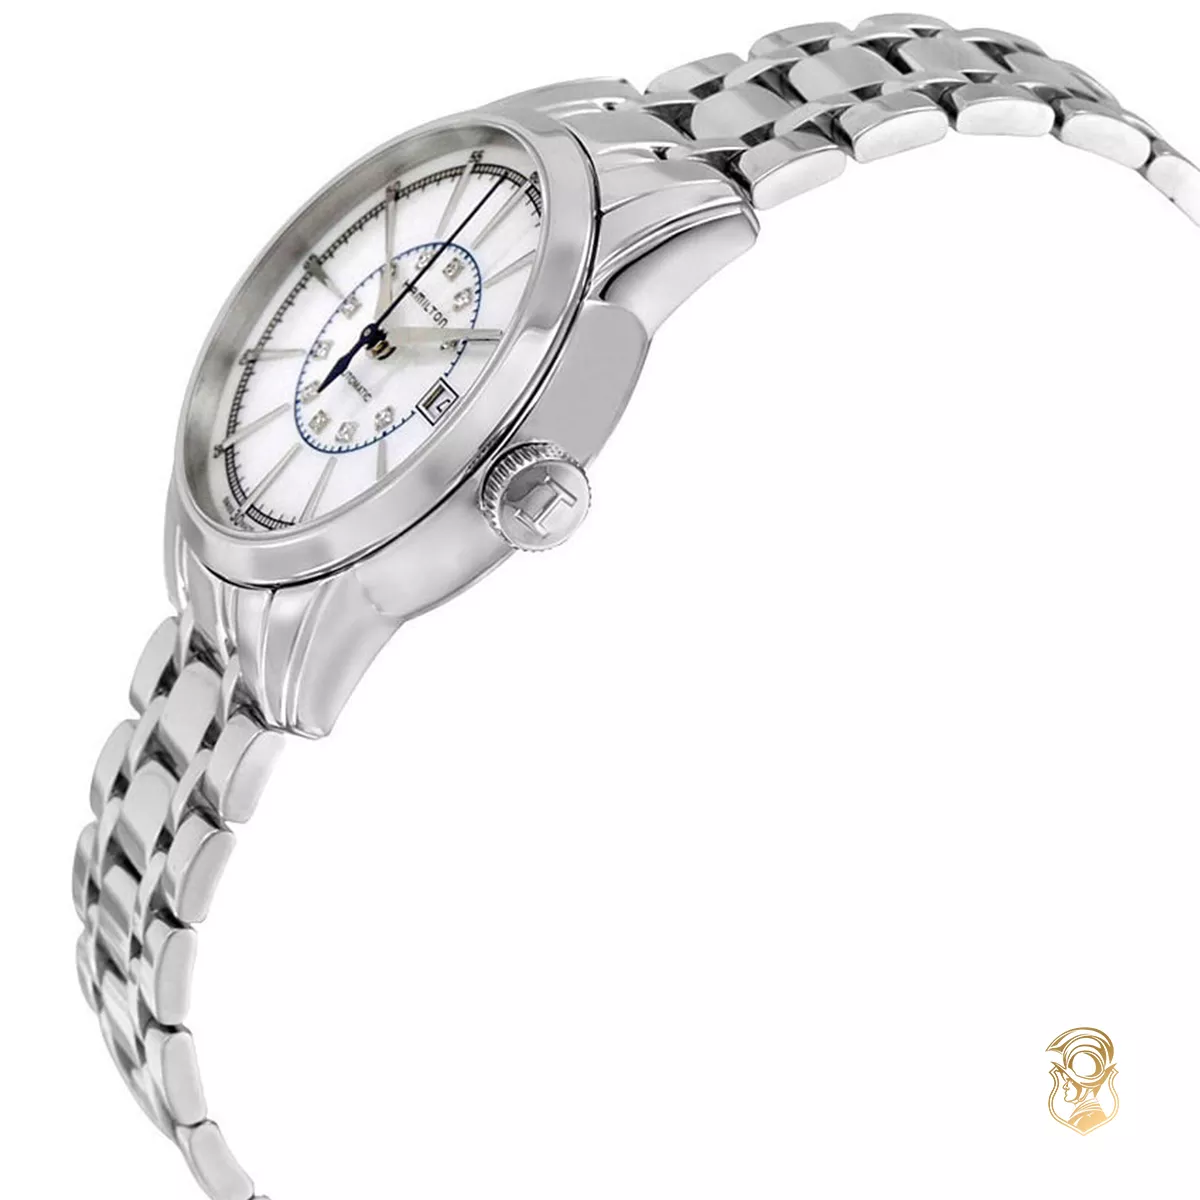 HAMILTON RAILROAD MOTHER OF PEARL WATCH 32MM